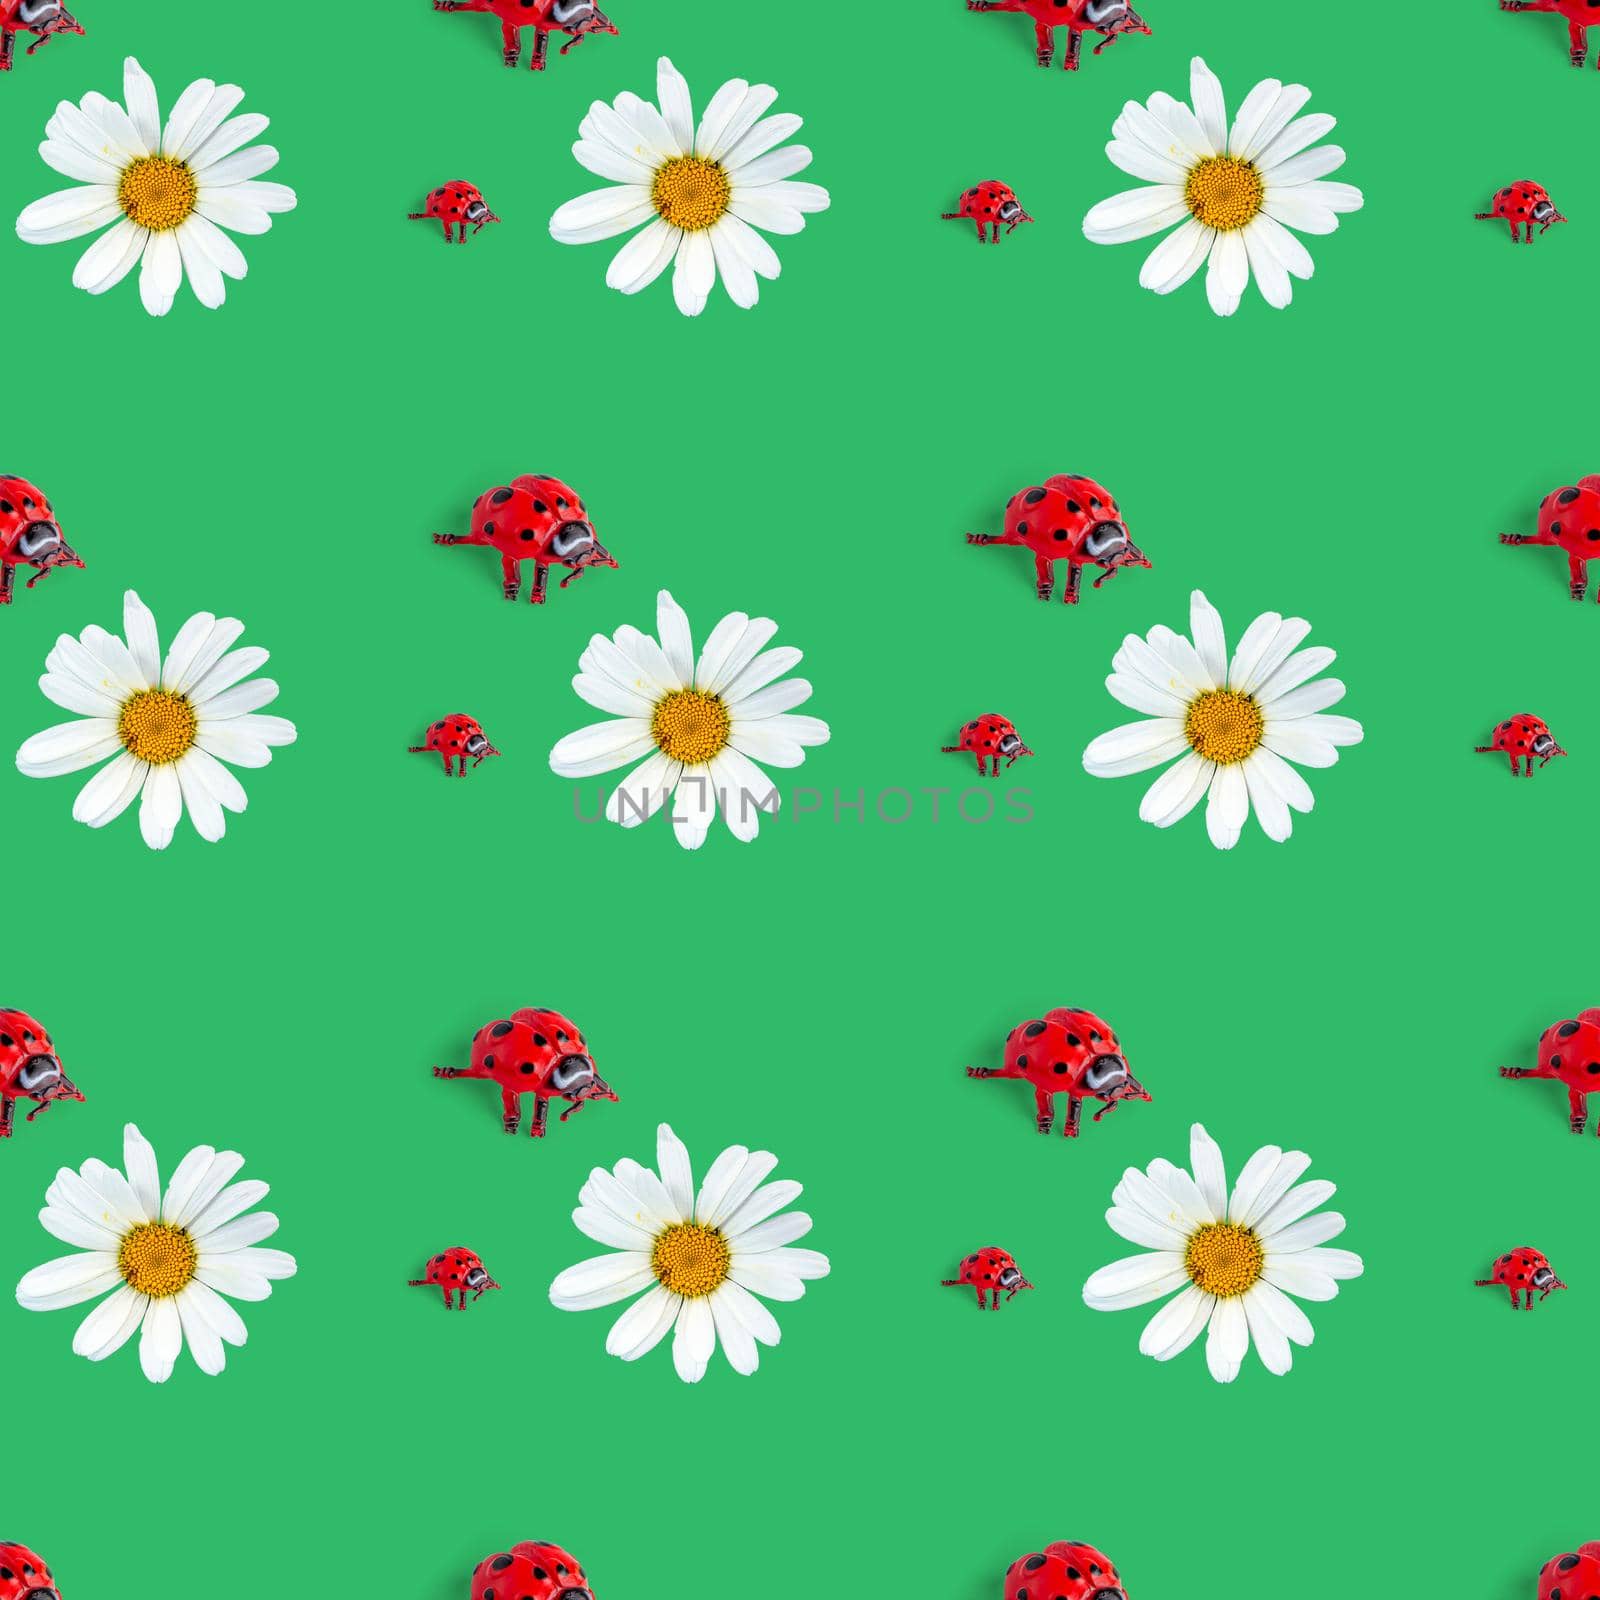 Seamless pattern of ladybug and chamomile on a green background by bySergPo